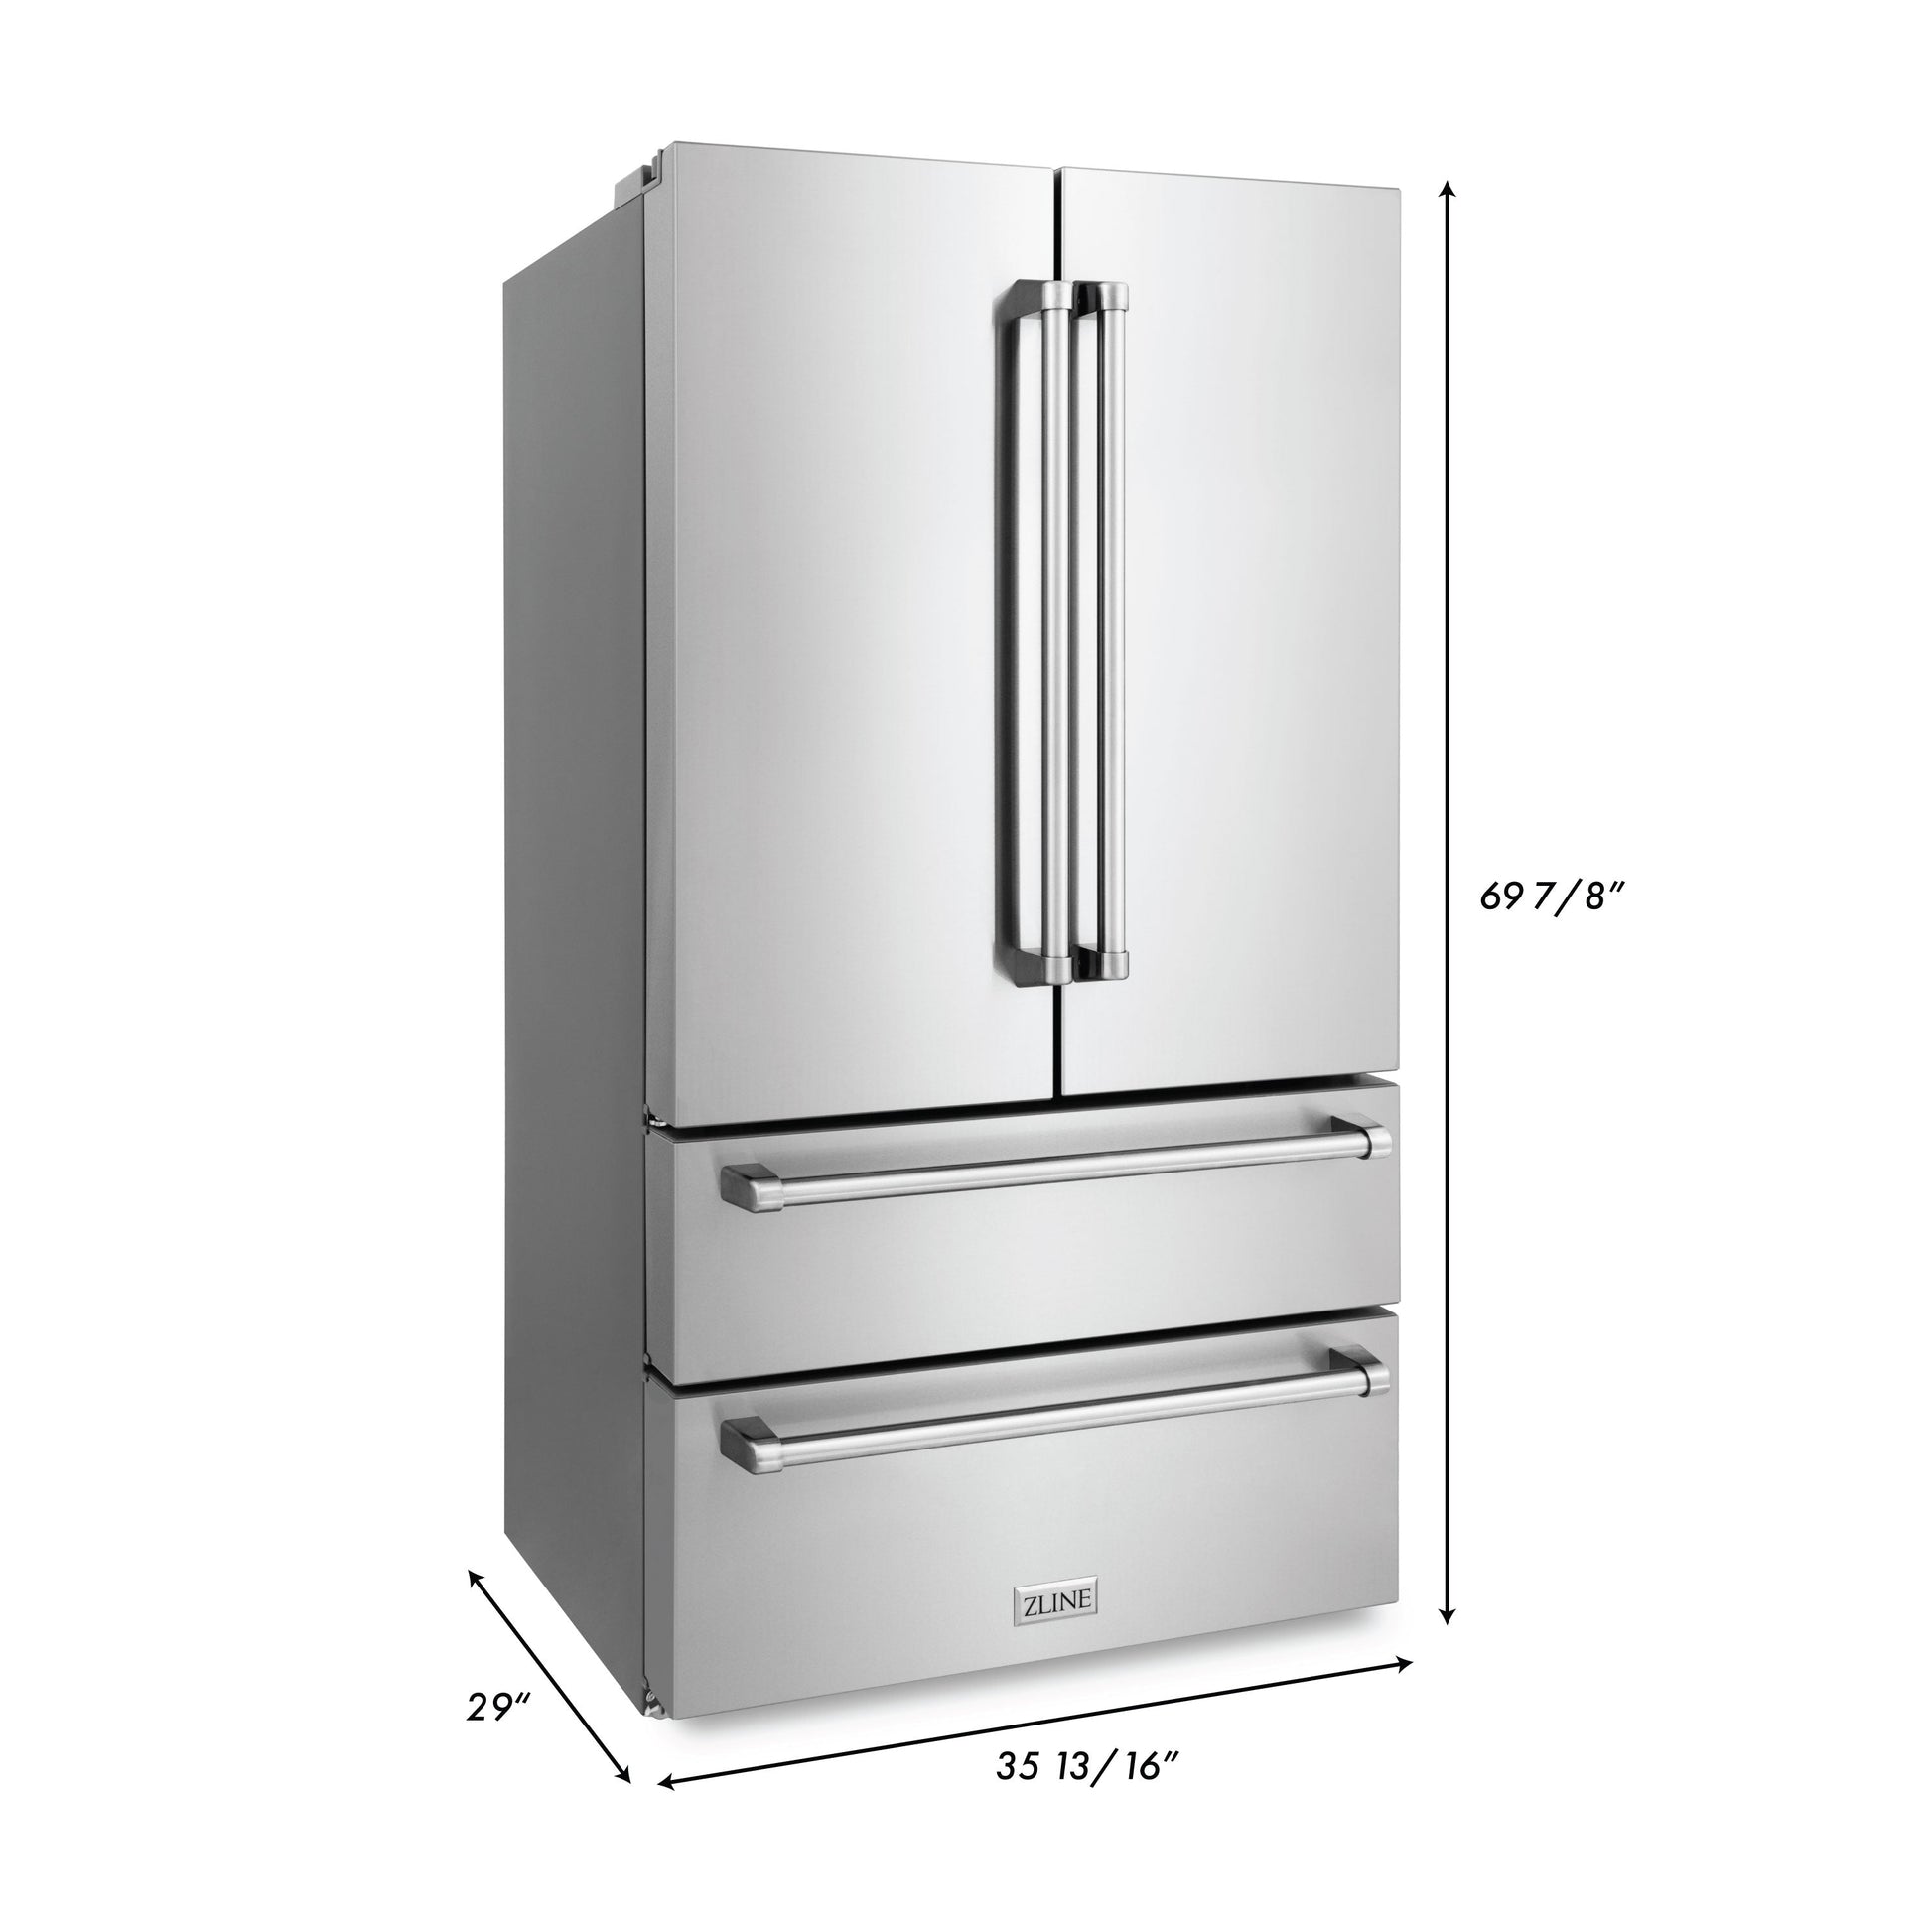 ZLINE 5-Appliance Kitchen Package with Refrigeration, 30" Stainless Steel Rangetop, 30" Range Hood, 30" Single Wall Oven, and 24" Tall Tub Dishwasher